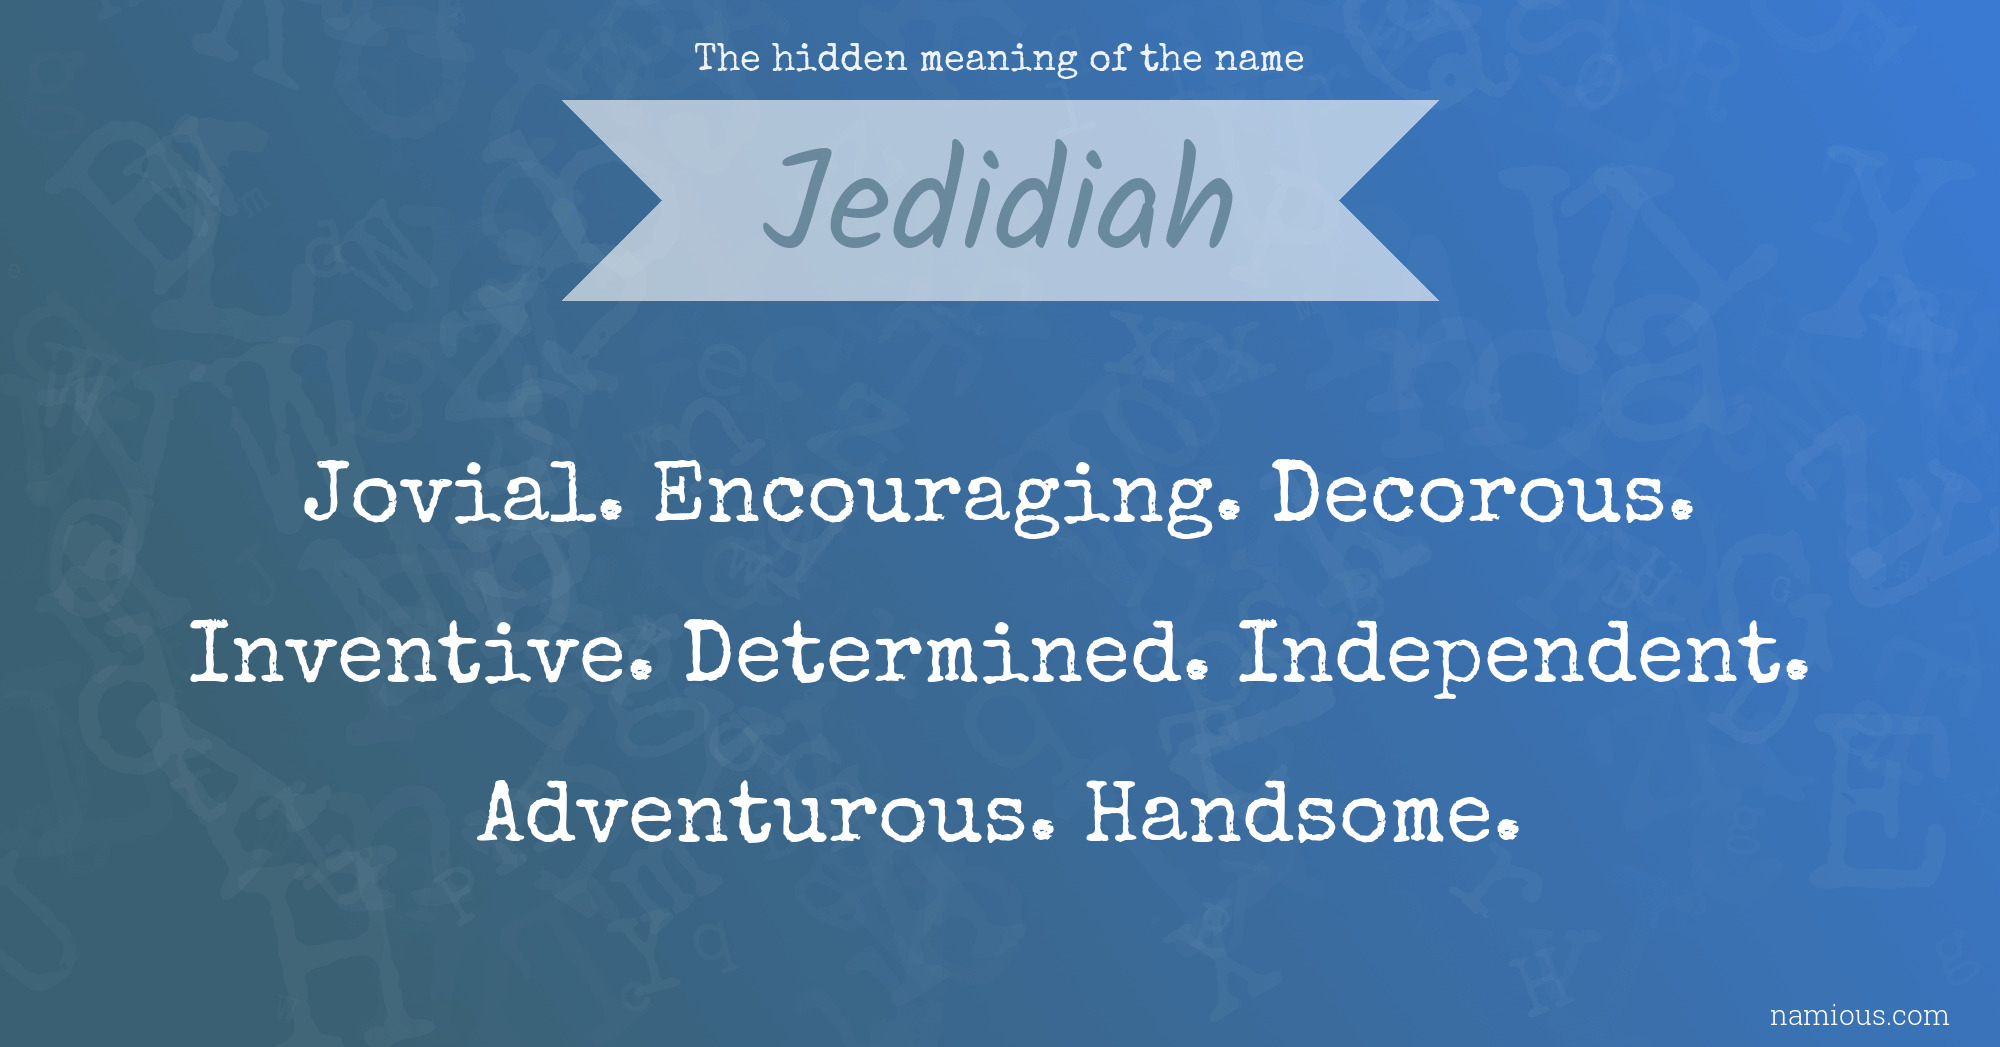 The hidden meaning of the name Jedidiah